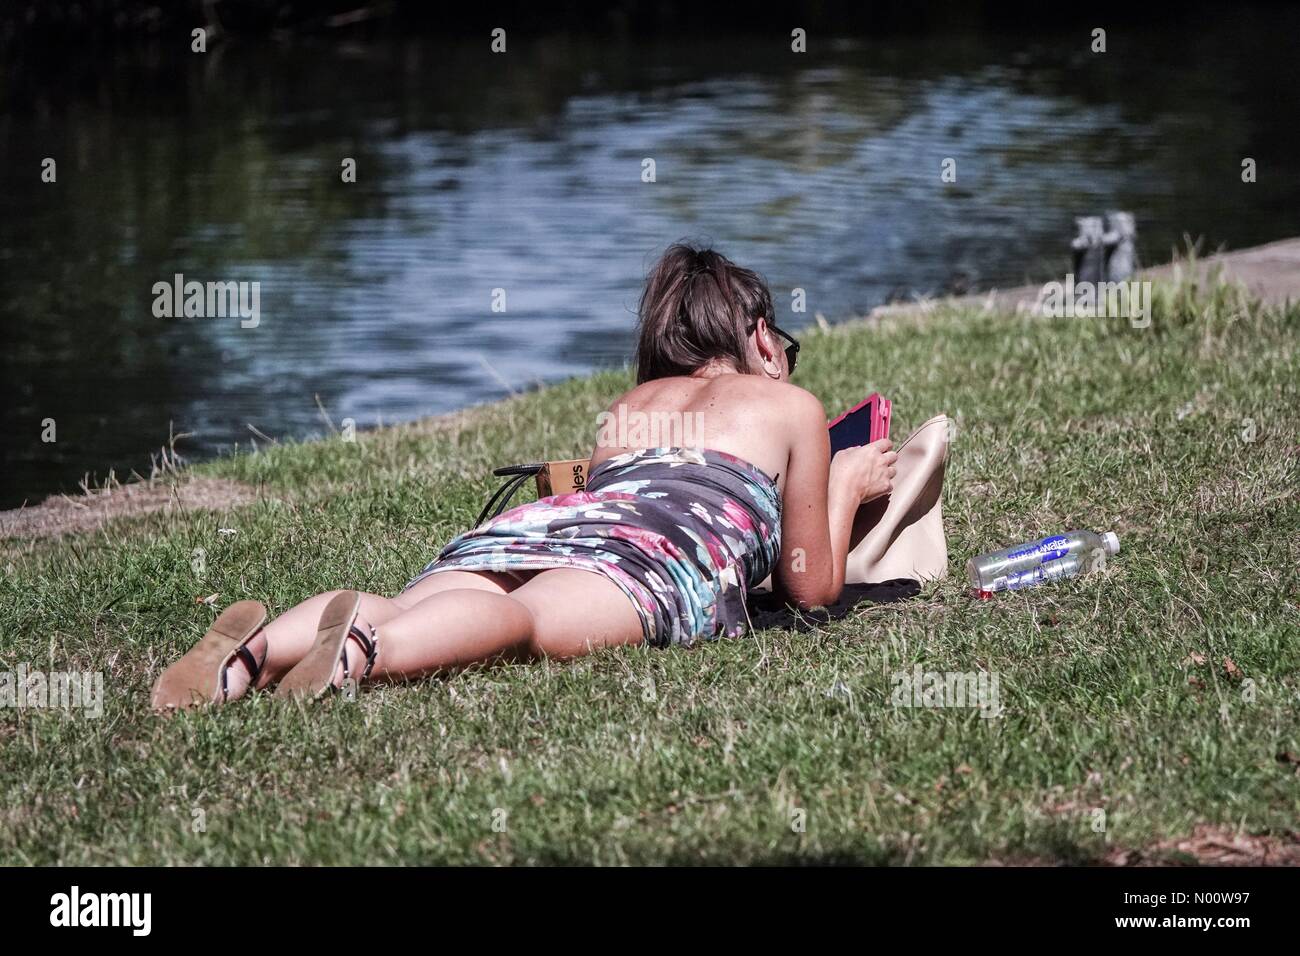 UK Weather: Hot and sunny in Godalming. Woolsack Way, Godalming. 03rd August 2018. Heatwave conditions across the south east today. A young lady reading by the River Wey in Godalming. Credit: jamesjagger/StockimoNews/Alamy Live News Stock Photo